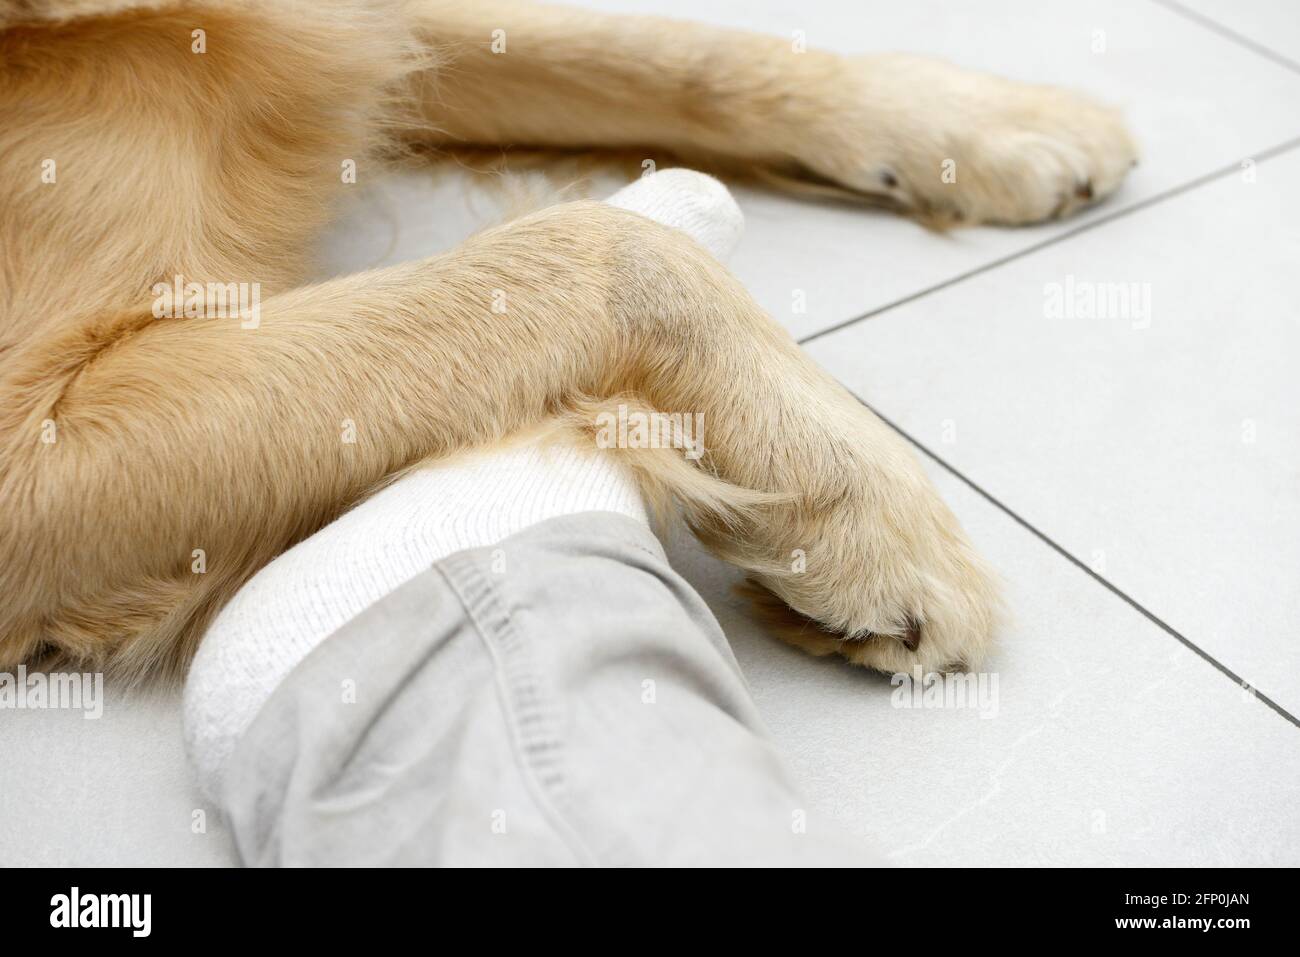 dog paws and feet lying on on white tile in the house Stock Photo